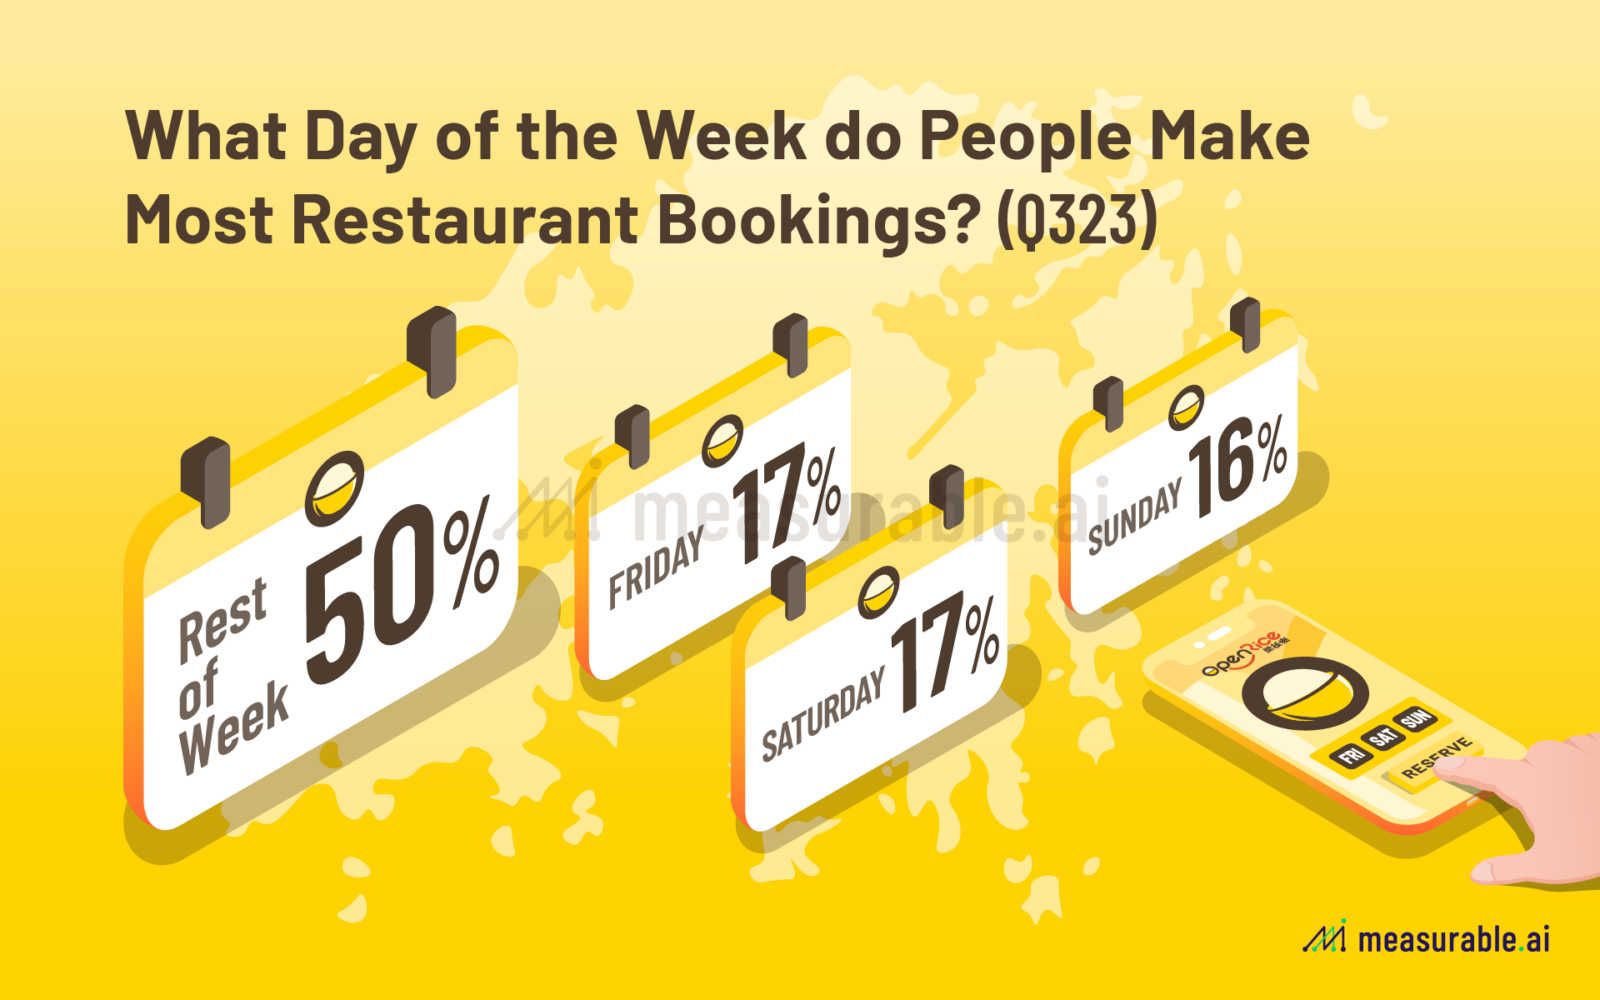 What Day of the Week do People Make Most Restaurant Bookings